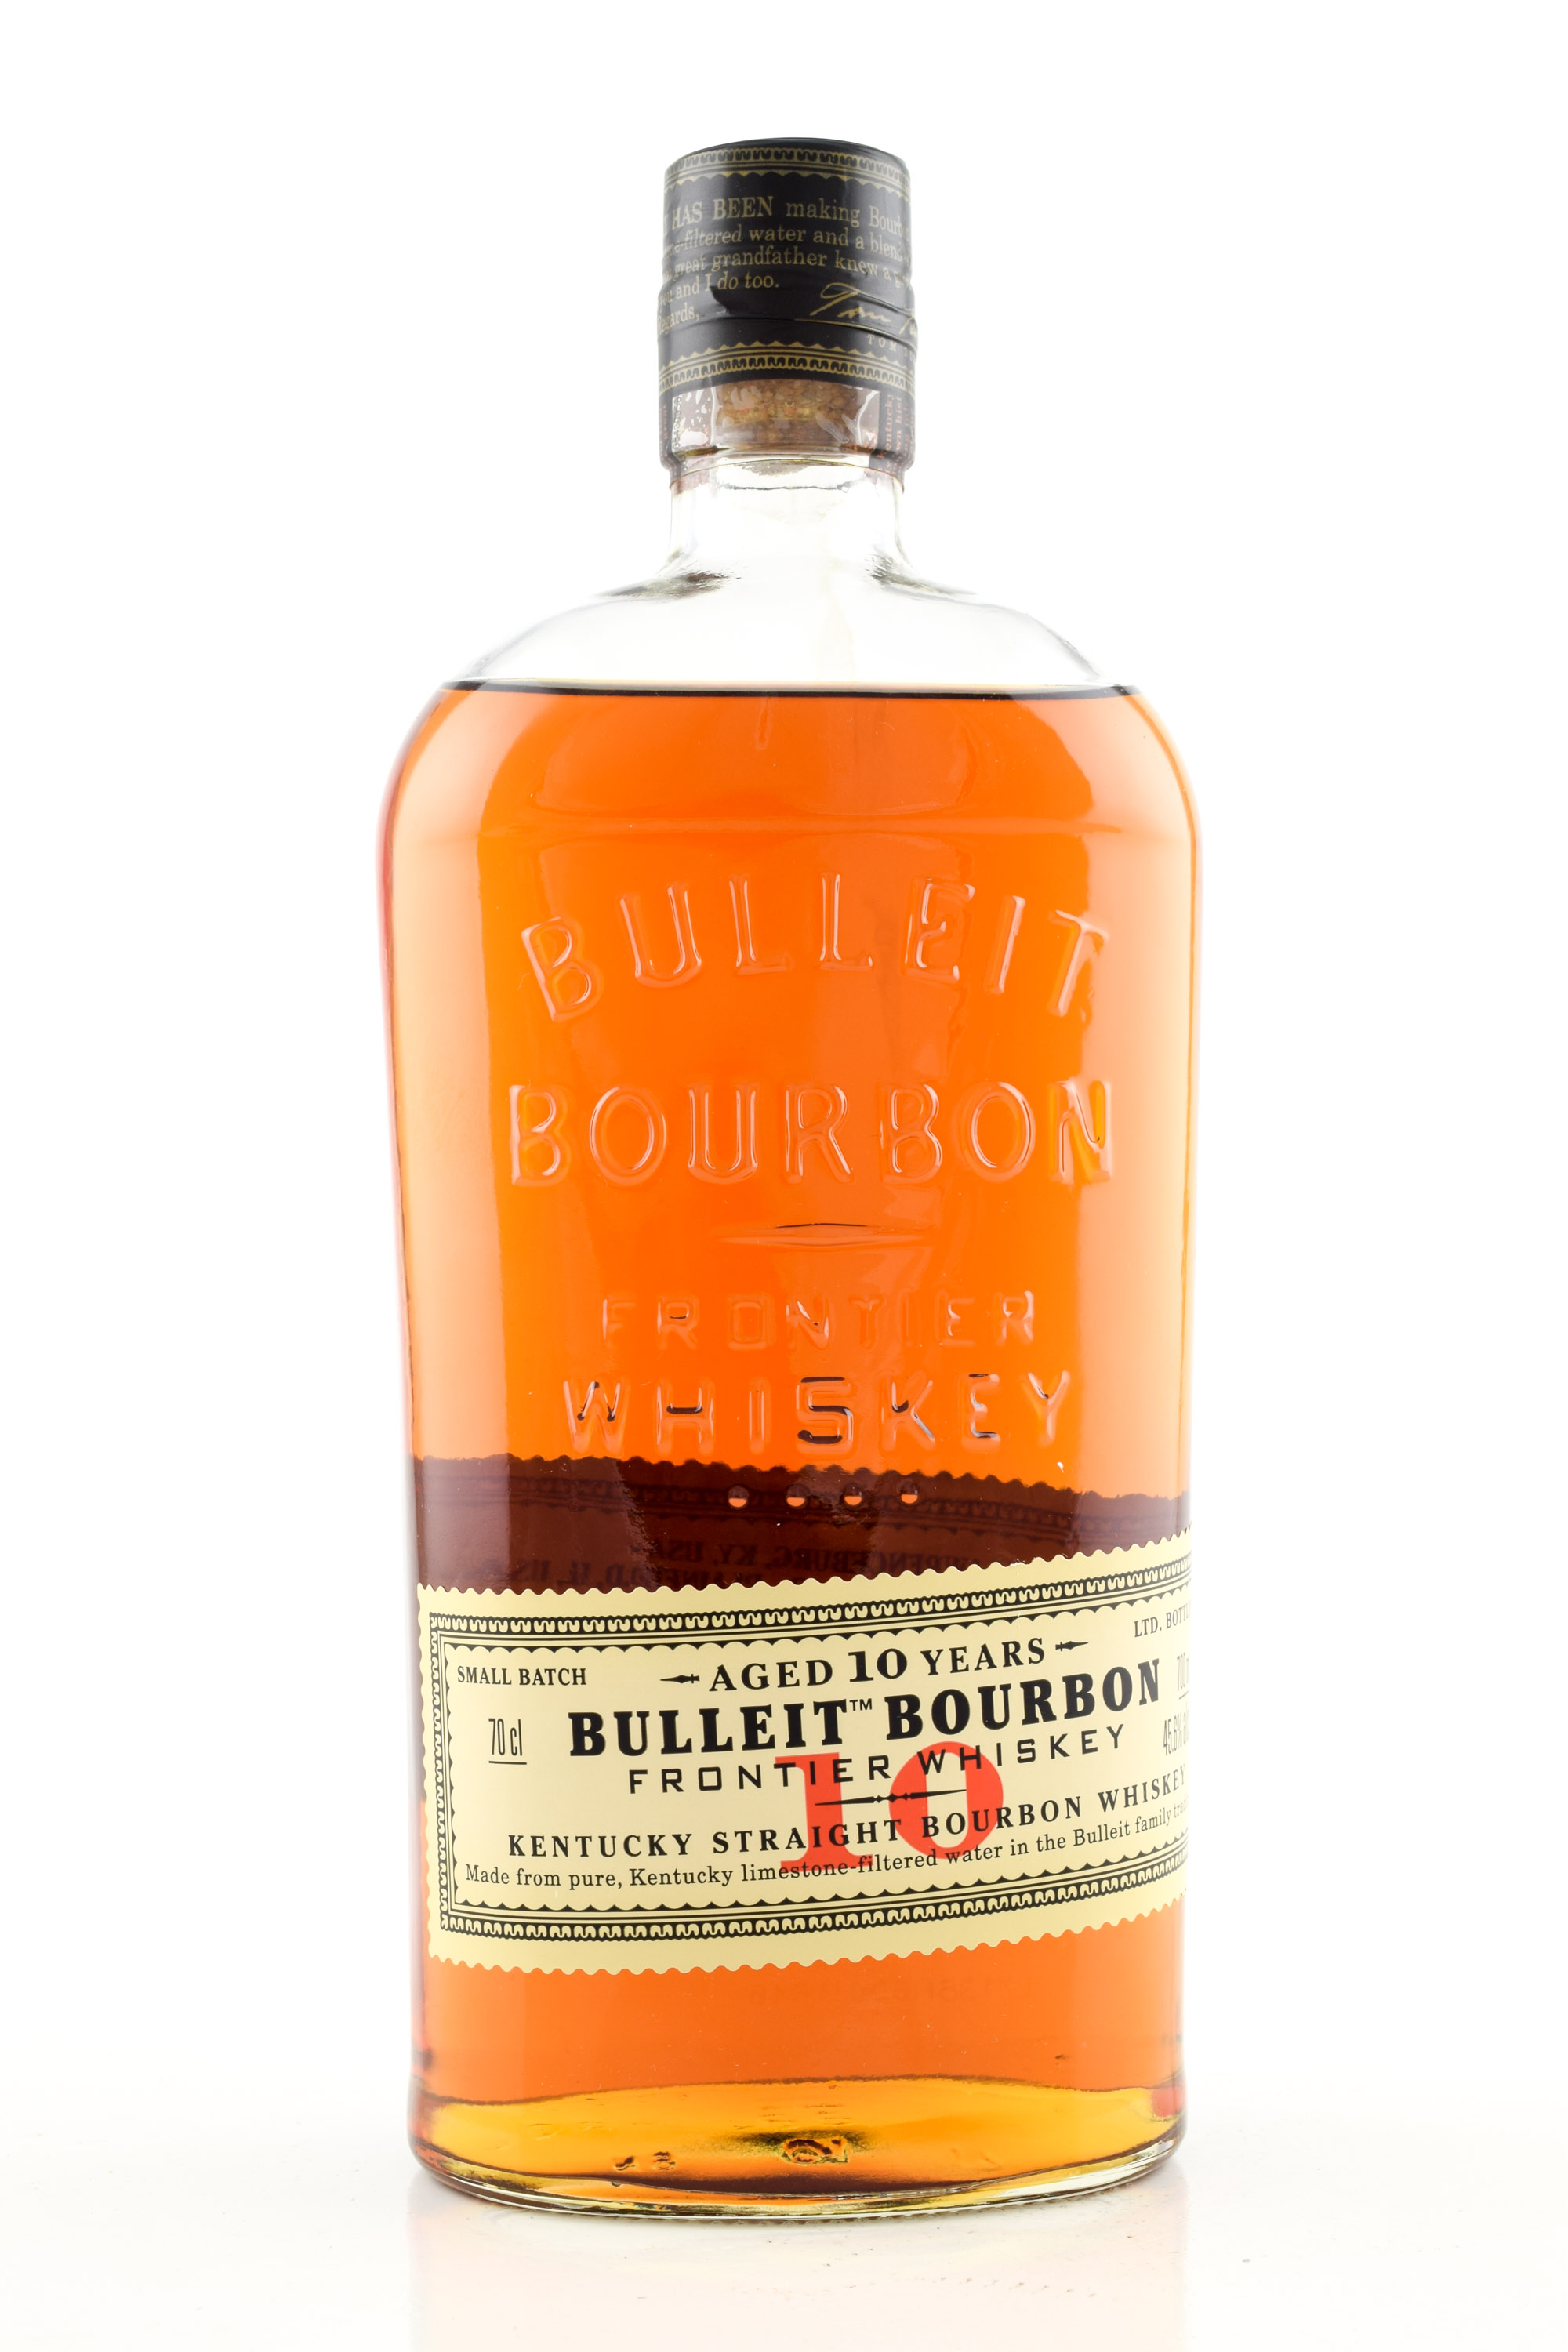 | of Kentucky Home Old Bourbon at Malts Bourbon Home Straight of Year explore Malts 10 now! Bulleit >>